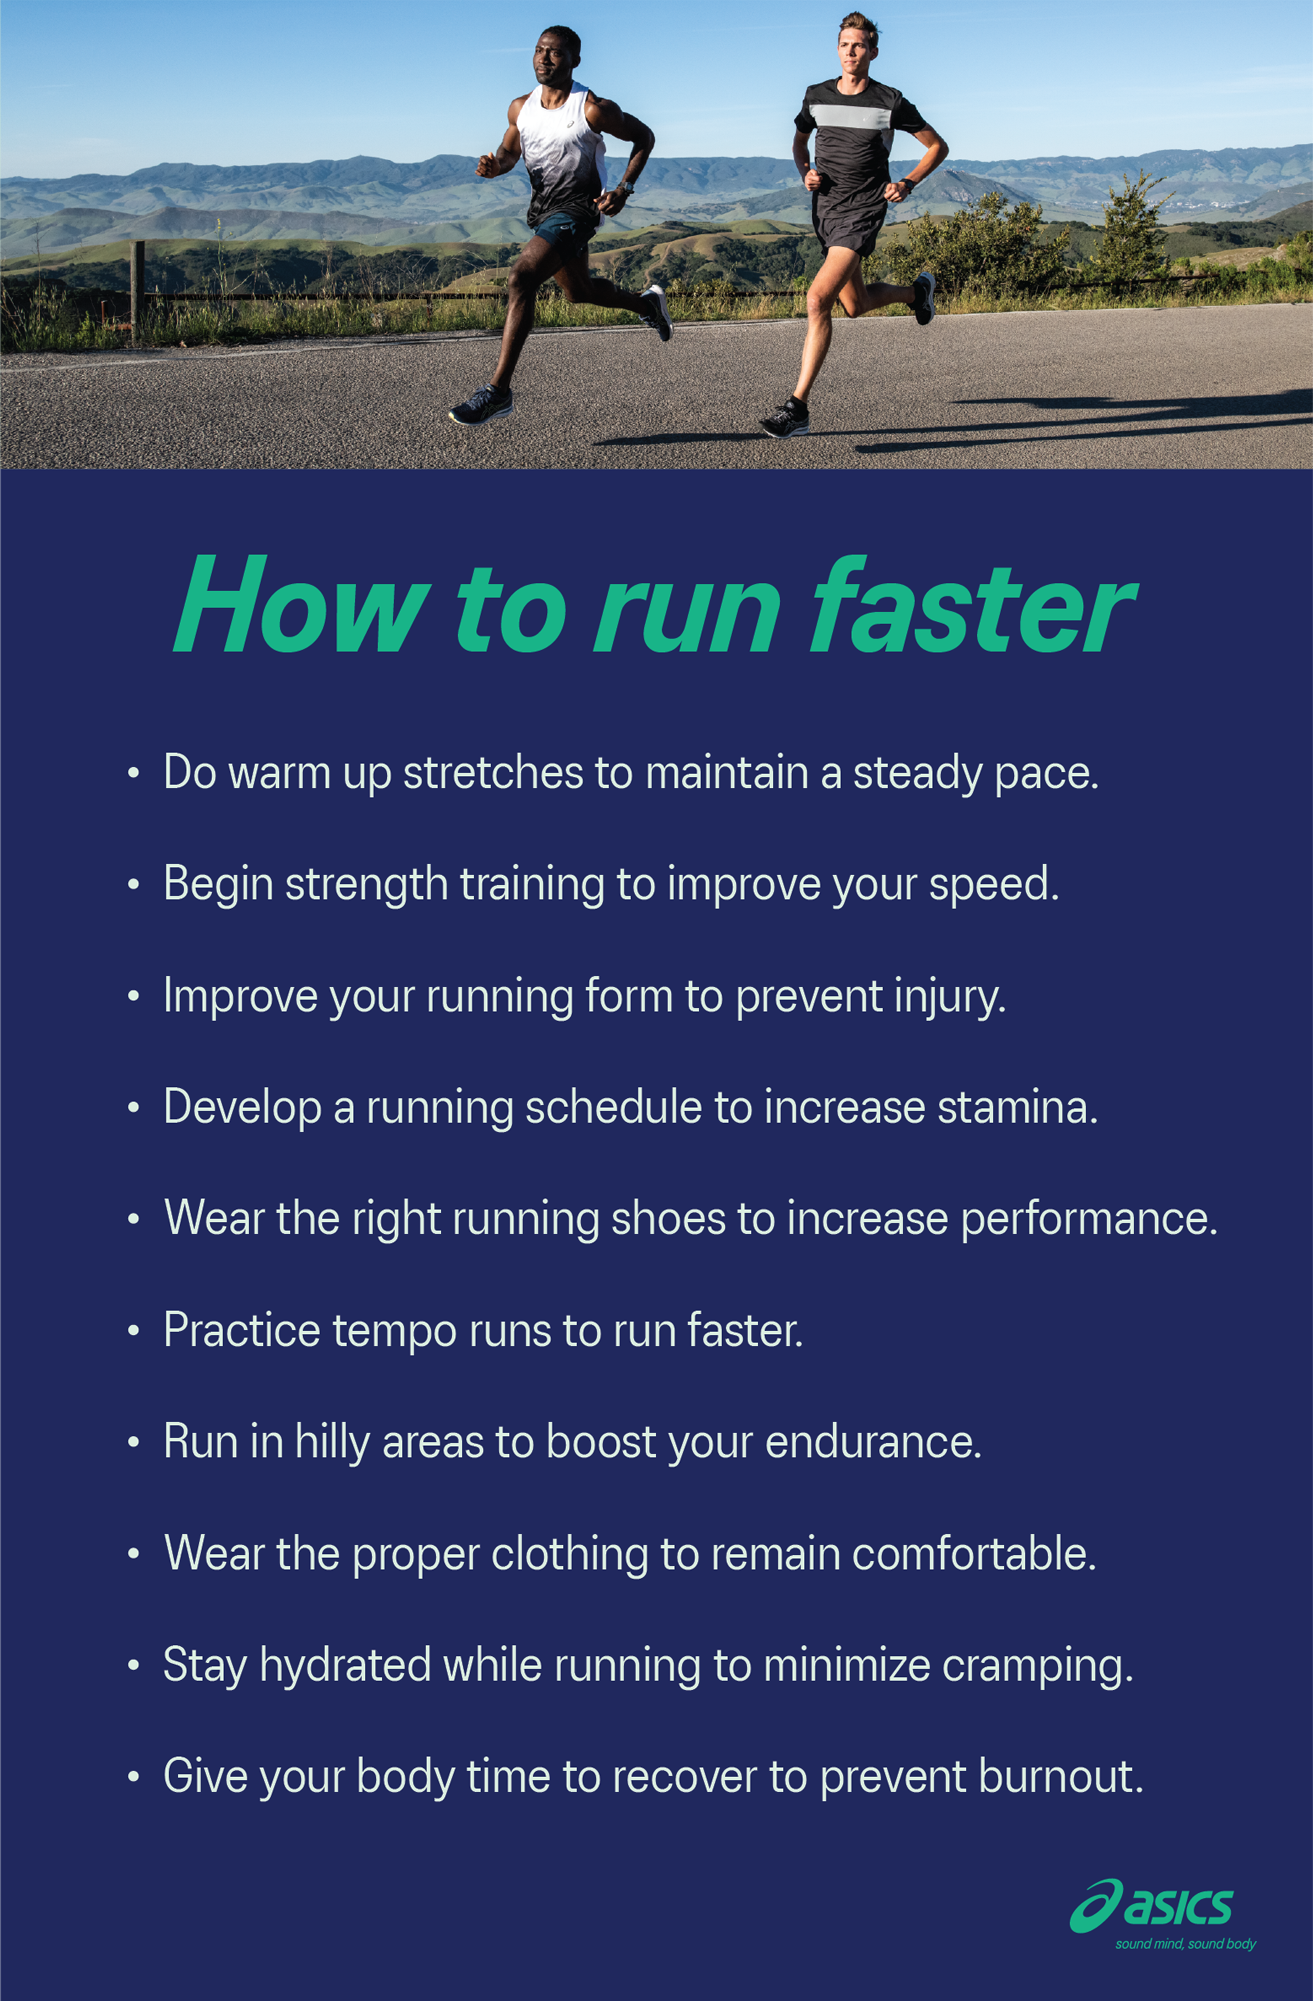 How to improve as runner and ways to get faster#foryoupage #foryou